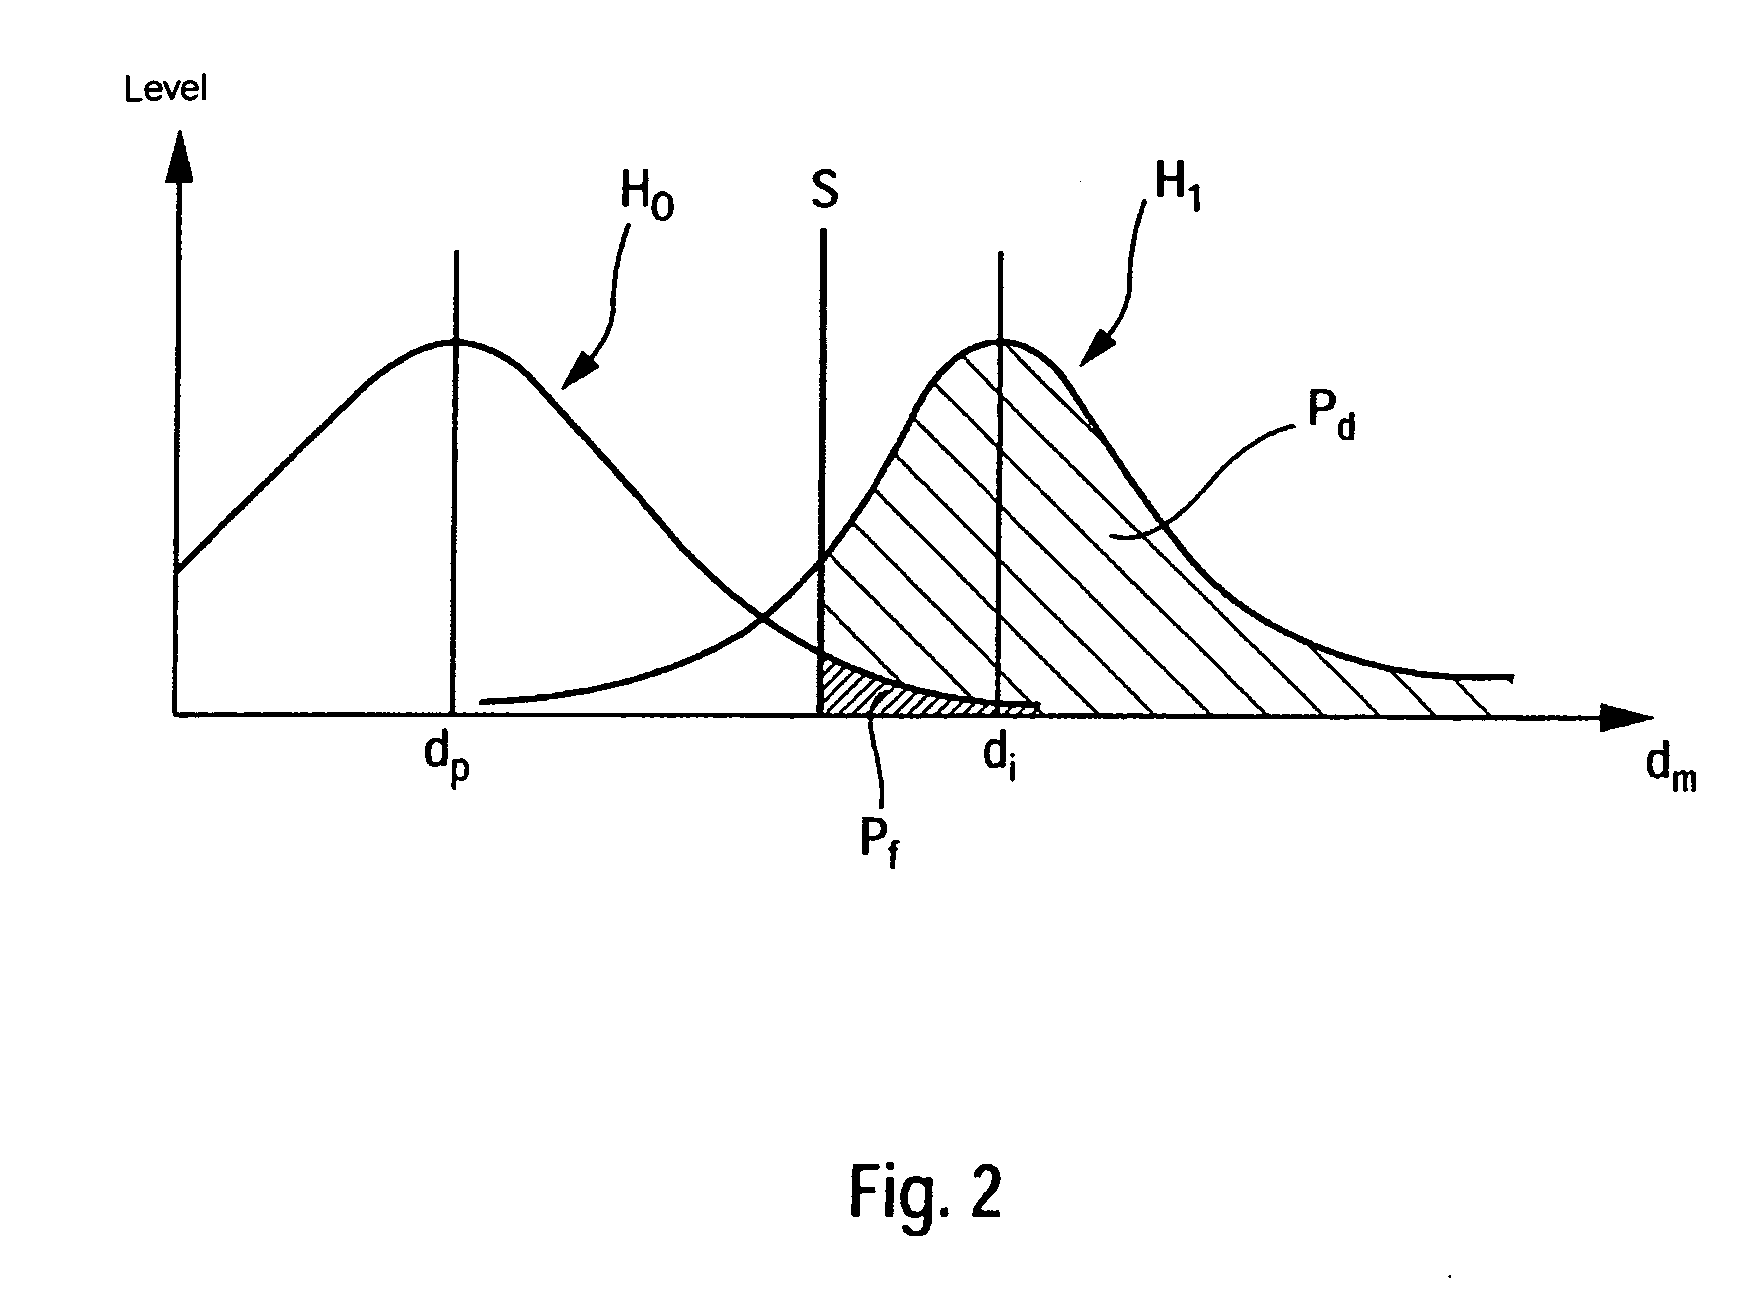 Signal-processing method and active sonar implementing same